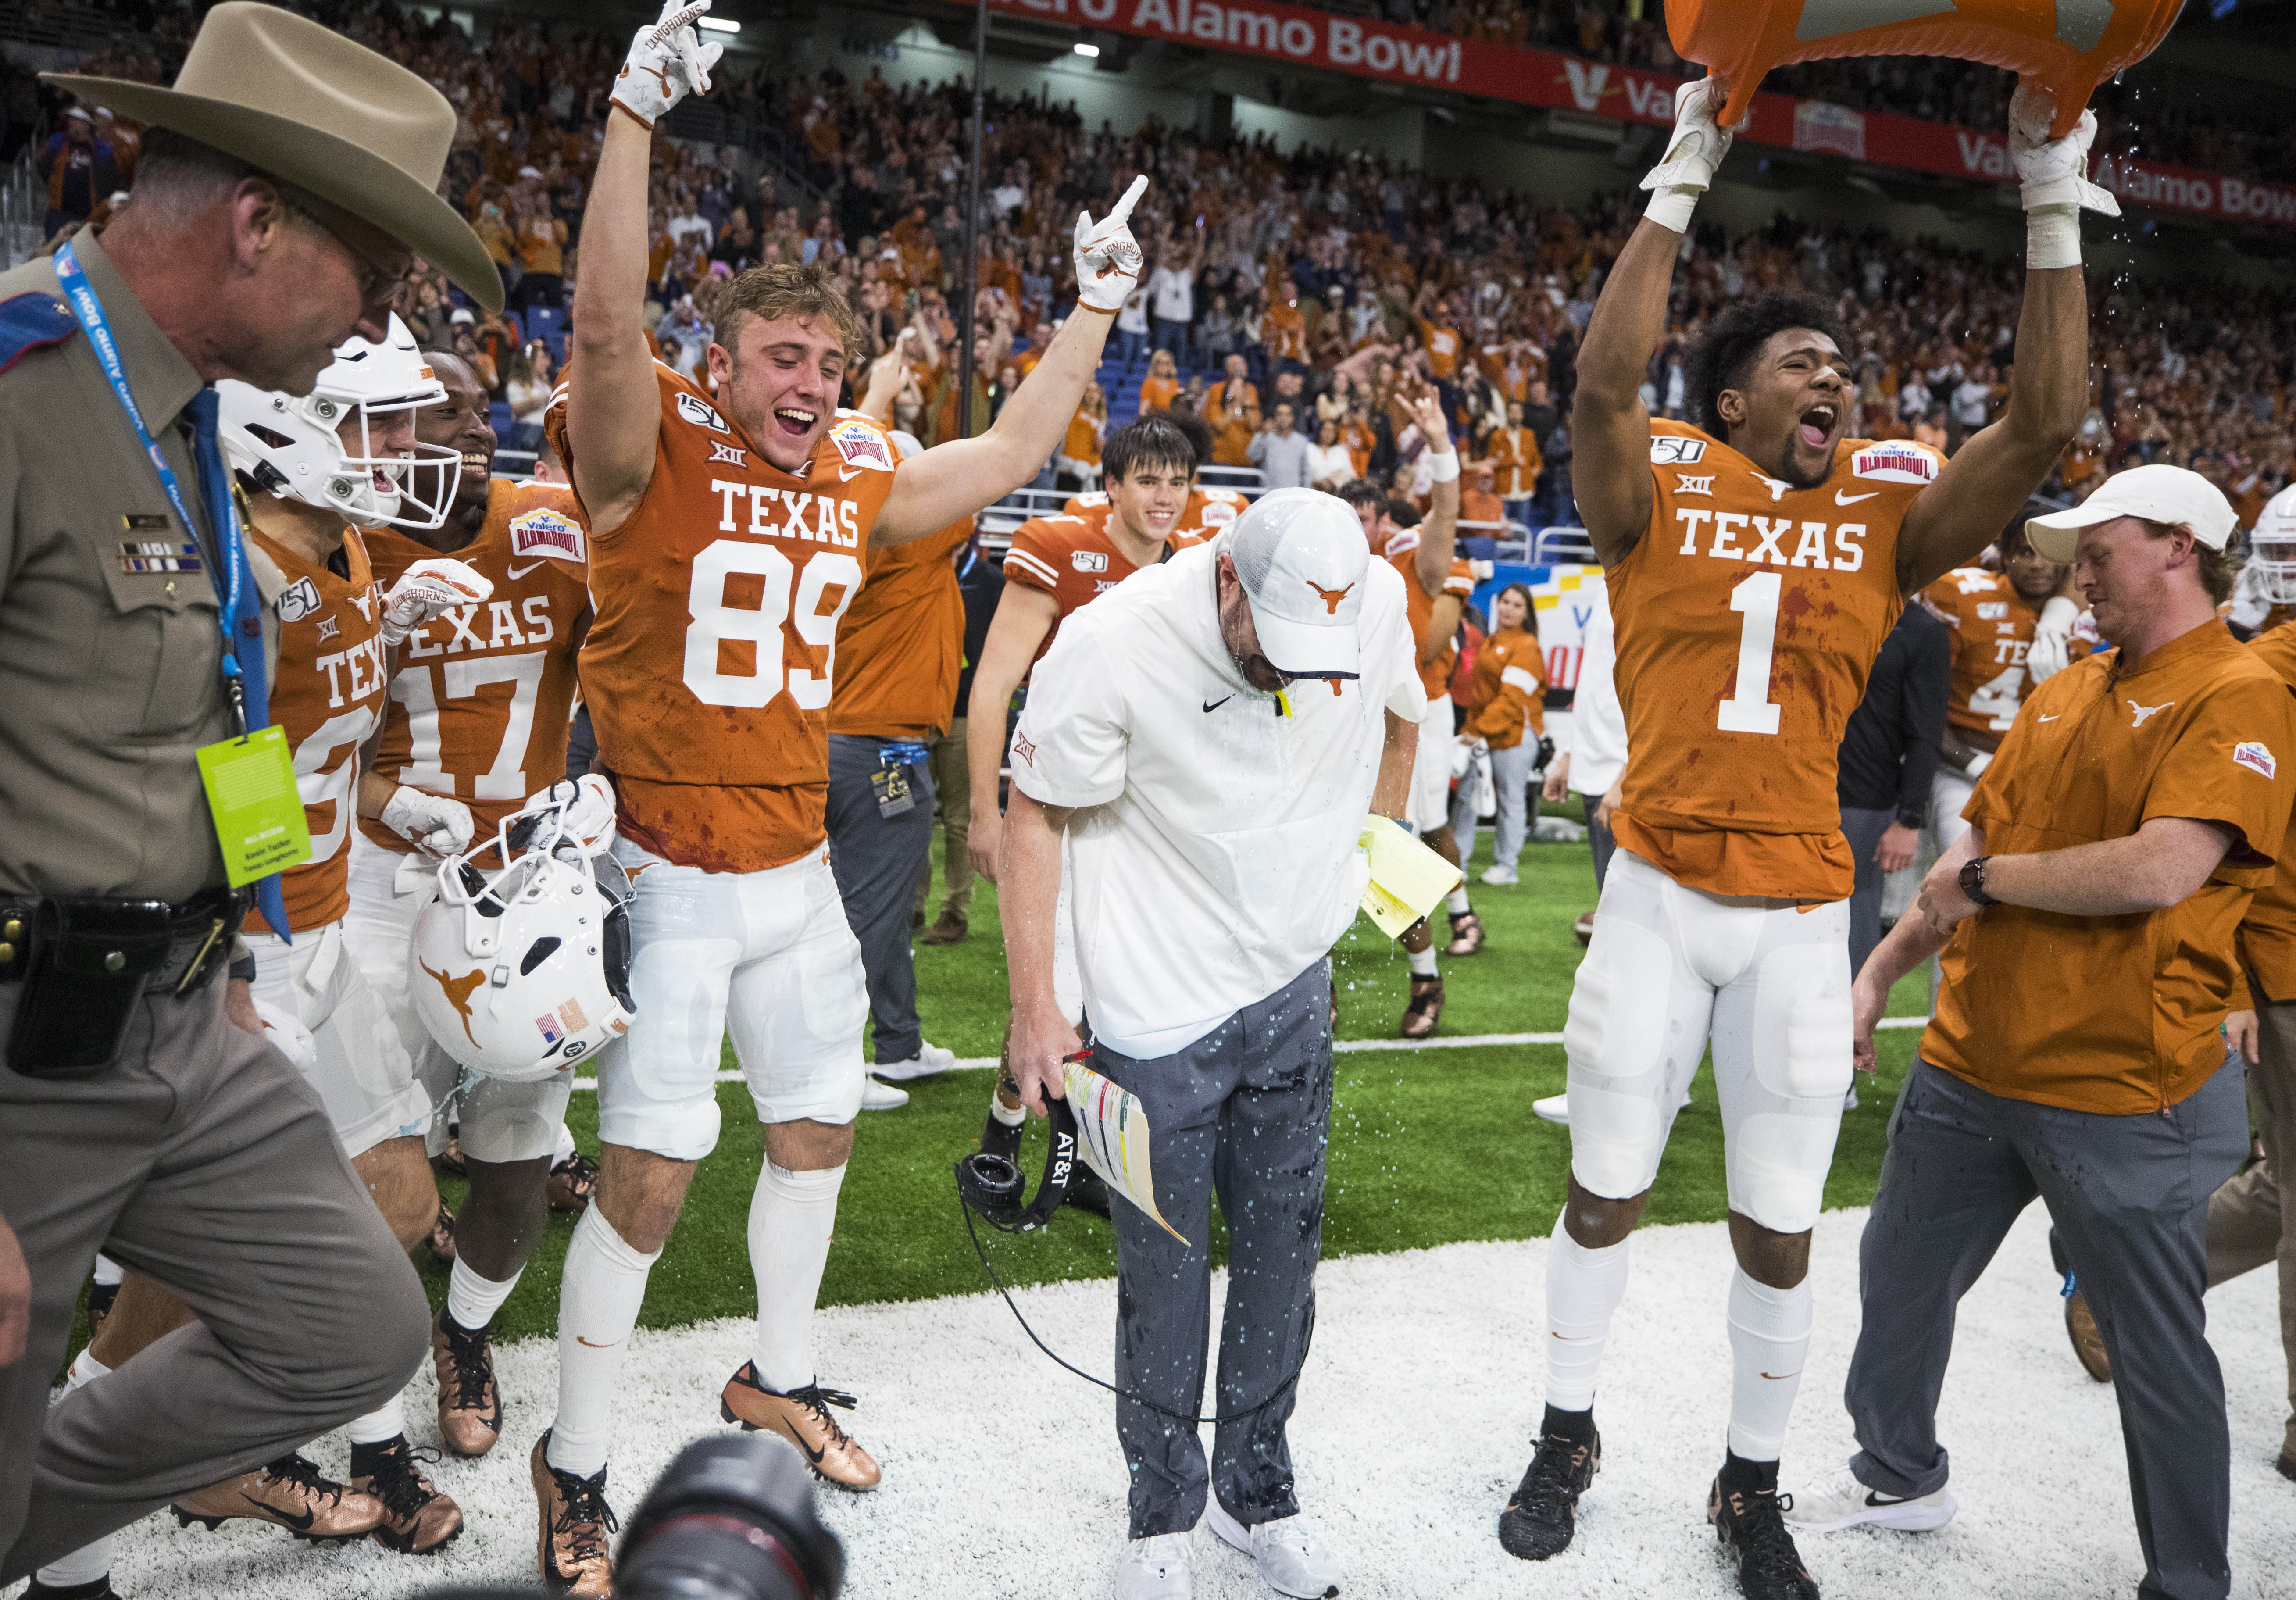 Valero Alamo Bowl Best Pictures From Texas Longhorns Victory